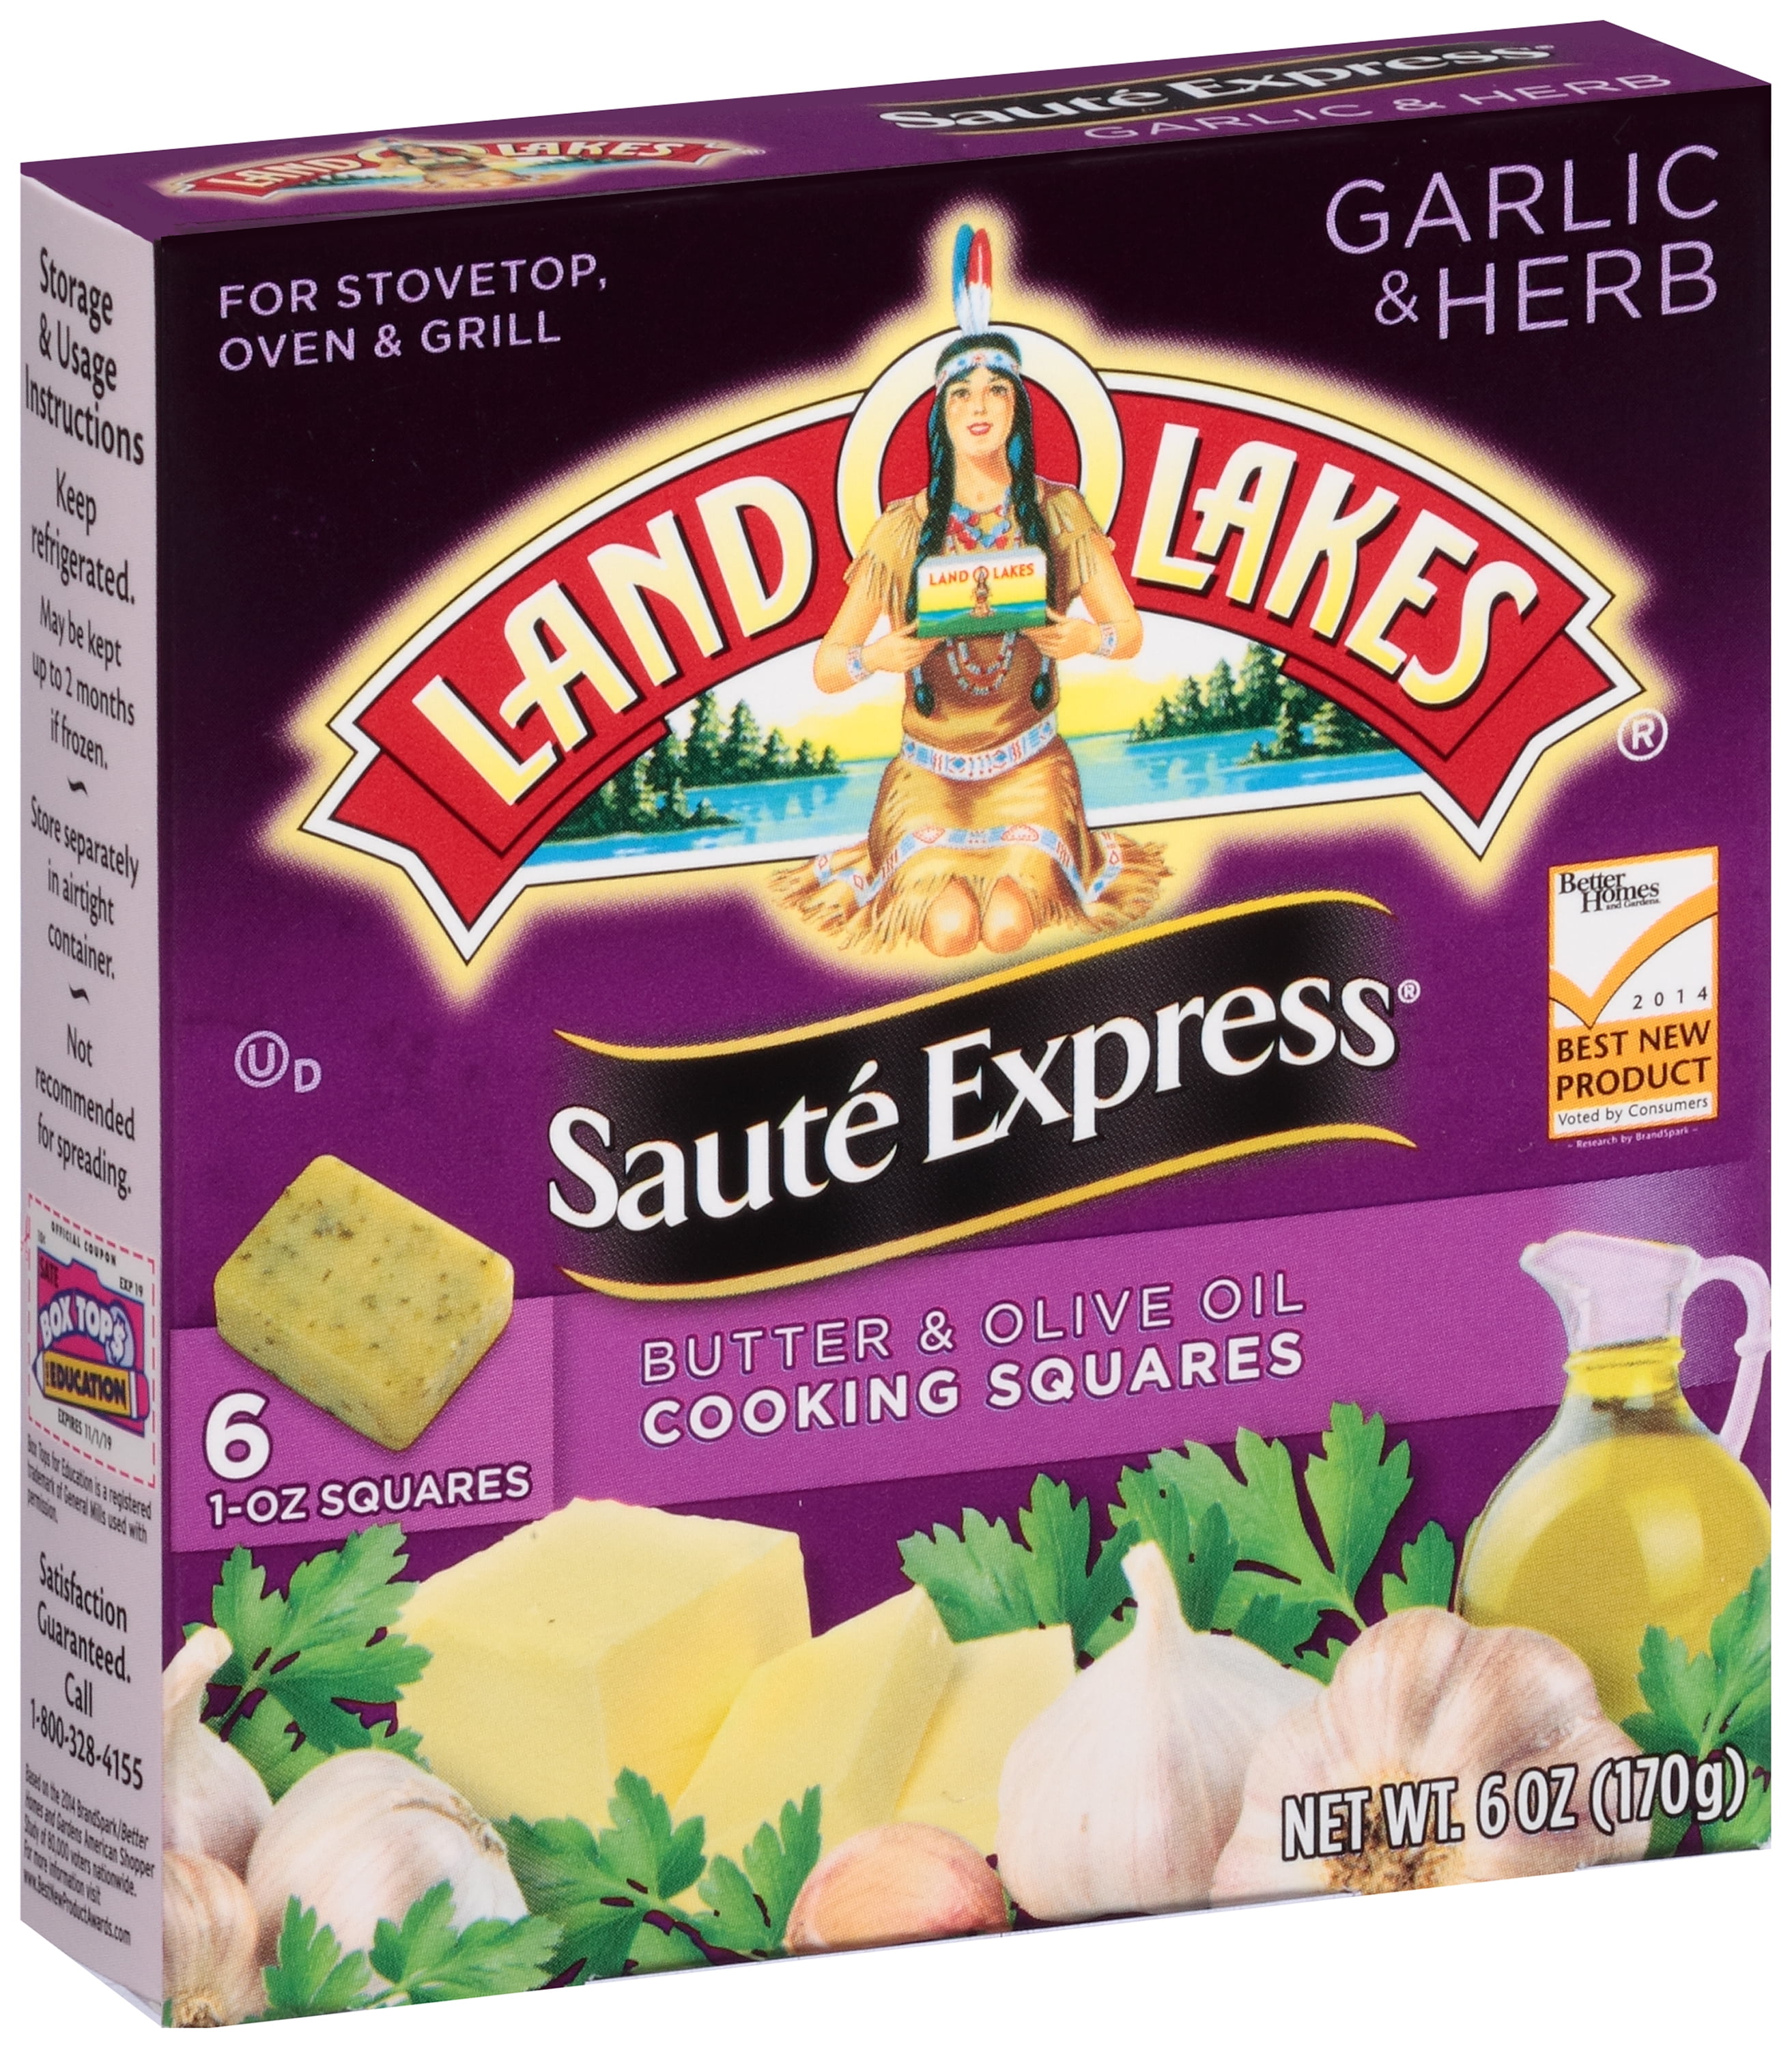 What are some recipes for using Land O'Lakes butter?